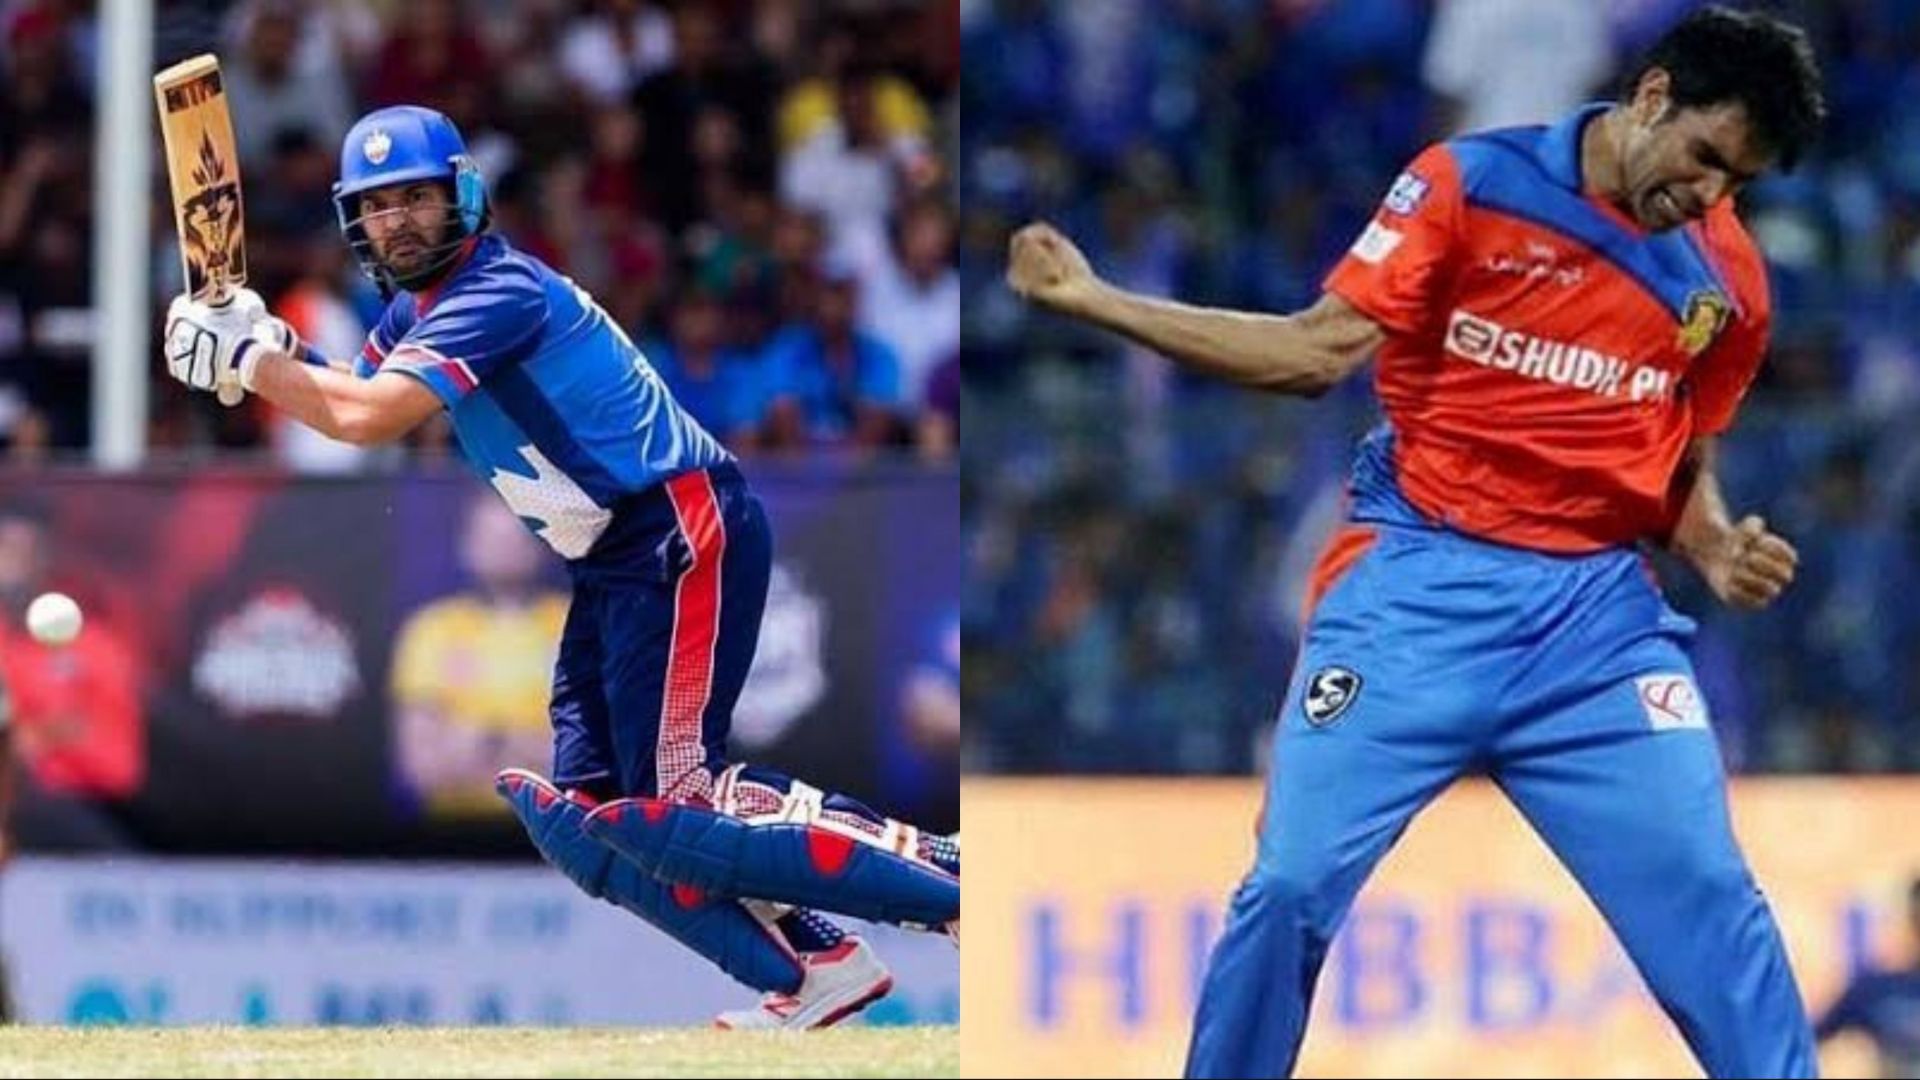 Yuvraj Singh and Munaf Patel have done well in overseas leagues